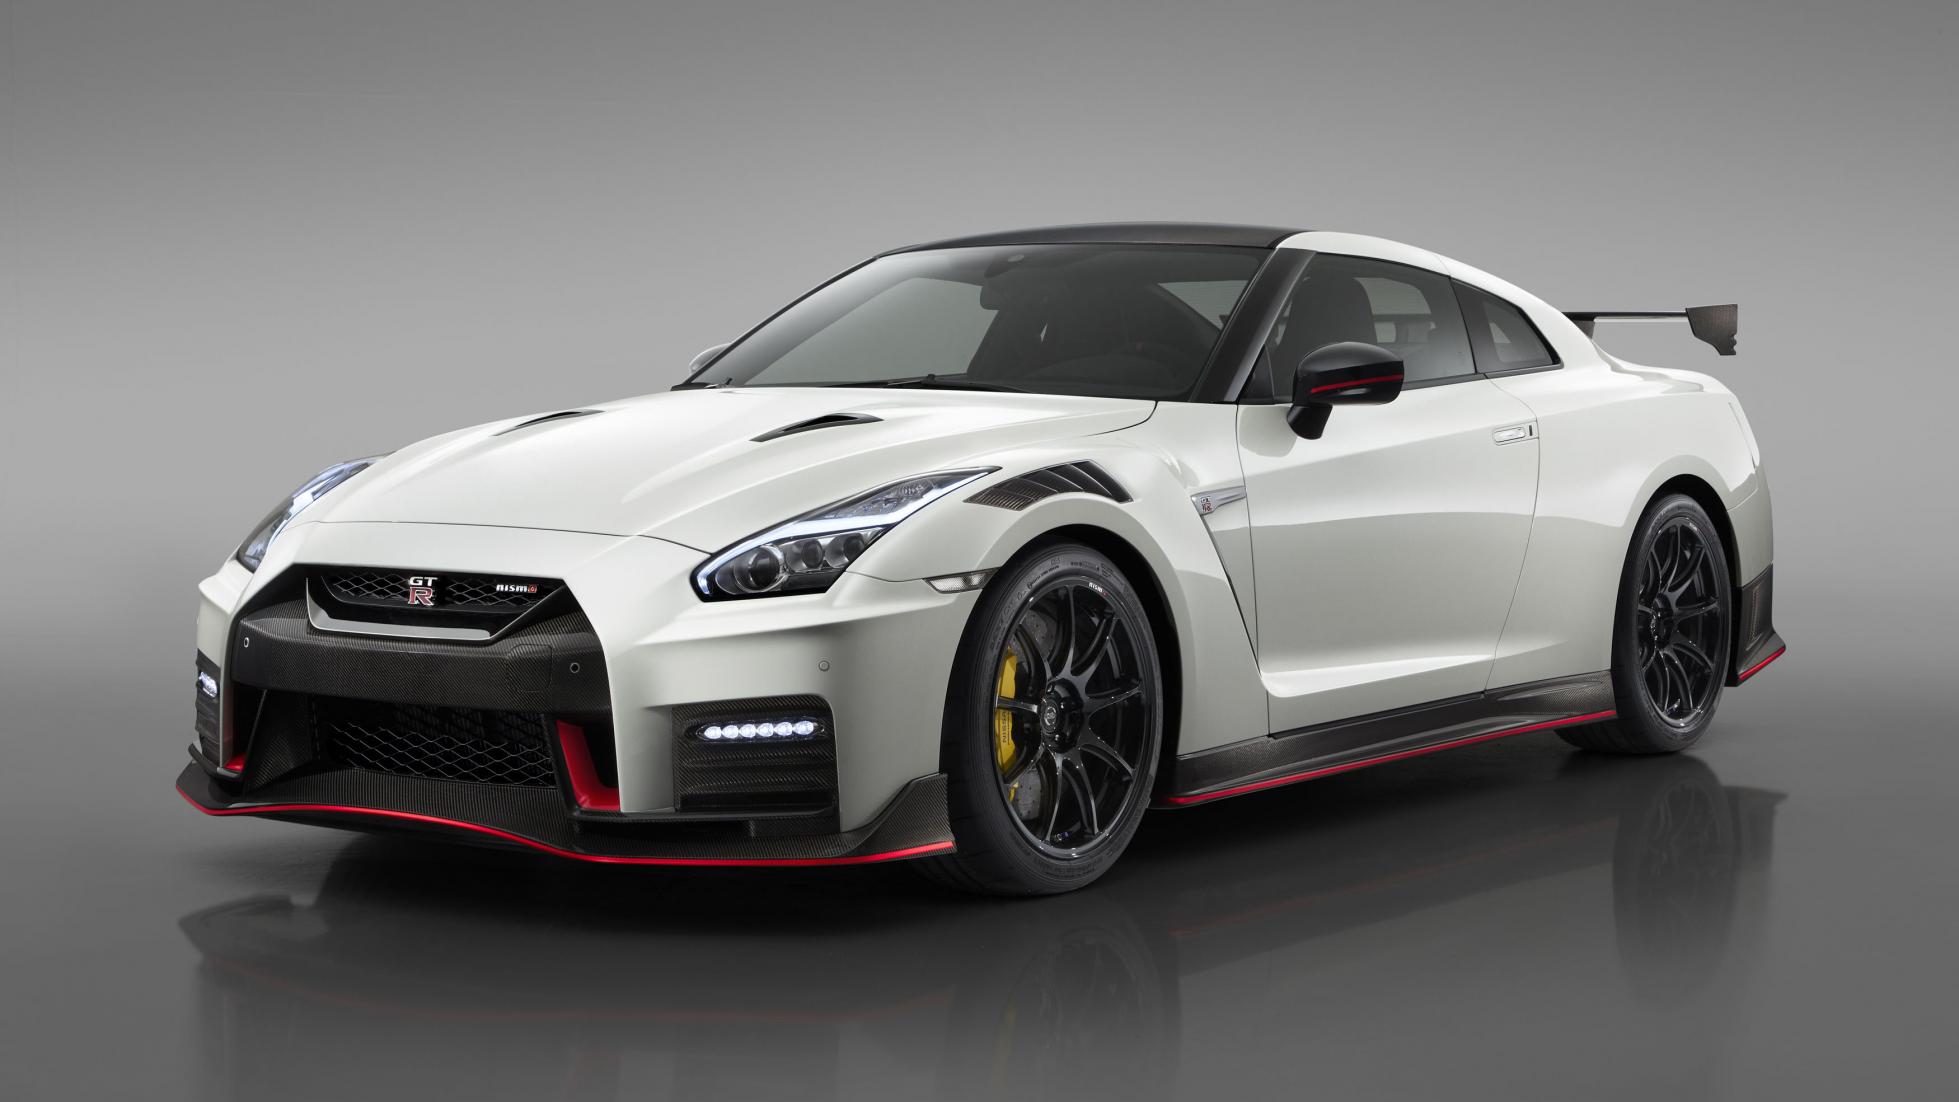 General 1959x1102 Nissan GT-R Nissan GT-R NISMO Nissan car white cars sports car Nismo Japanese cars gray background vehicle